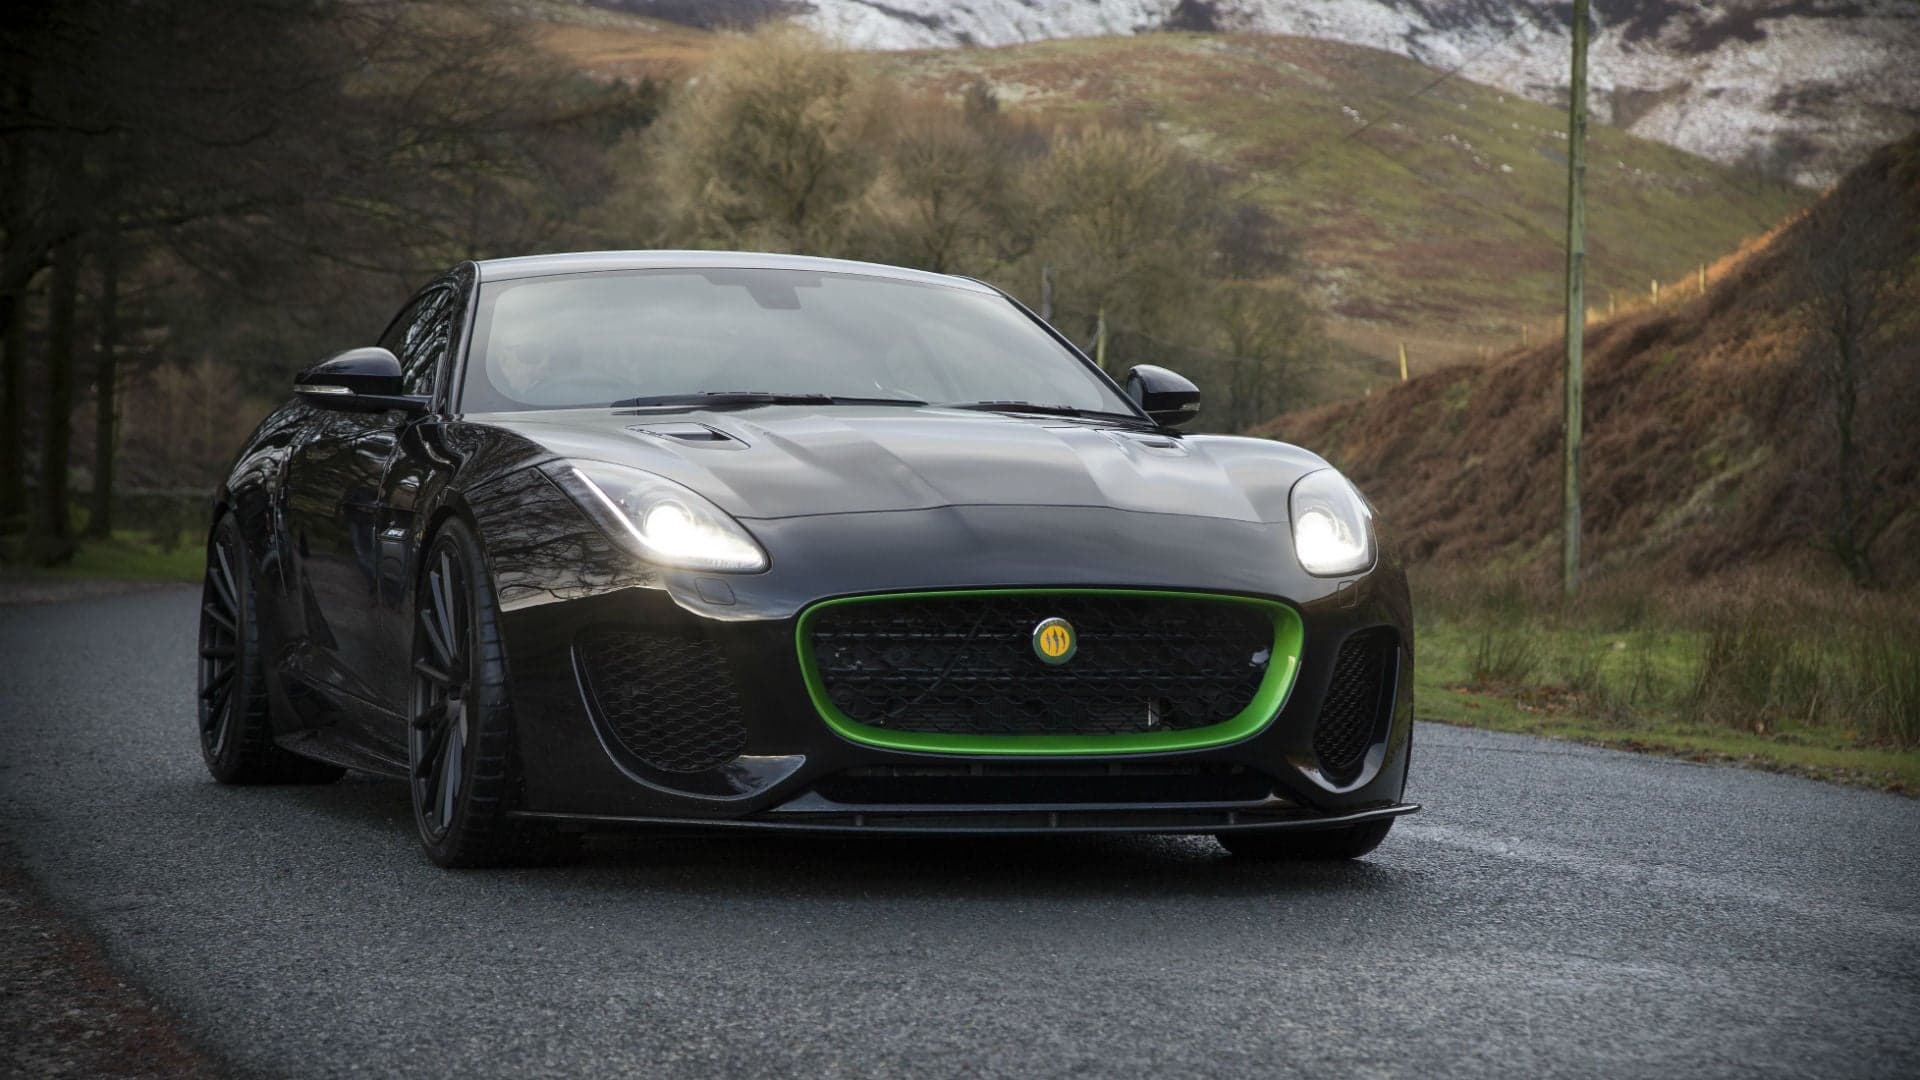 Lister Spices Up the Jaguar F-Type with 666 Horsepower and a 208-MPH Top Speed